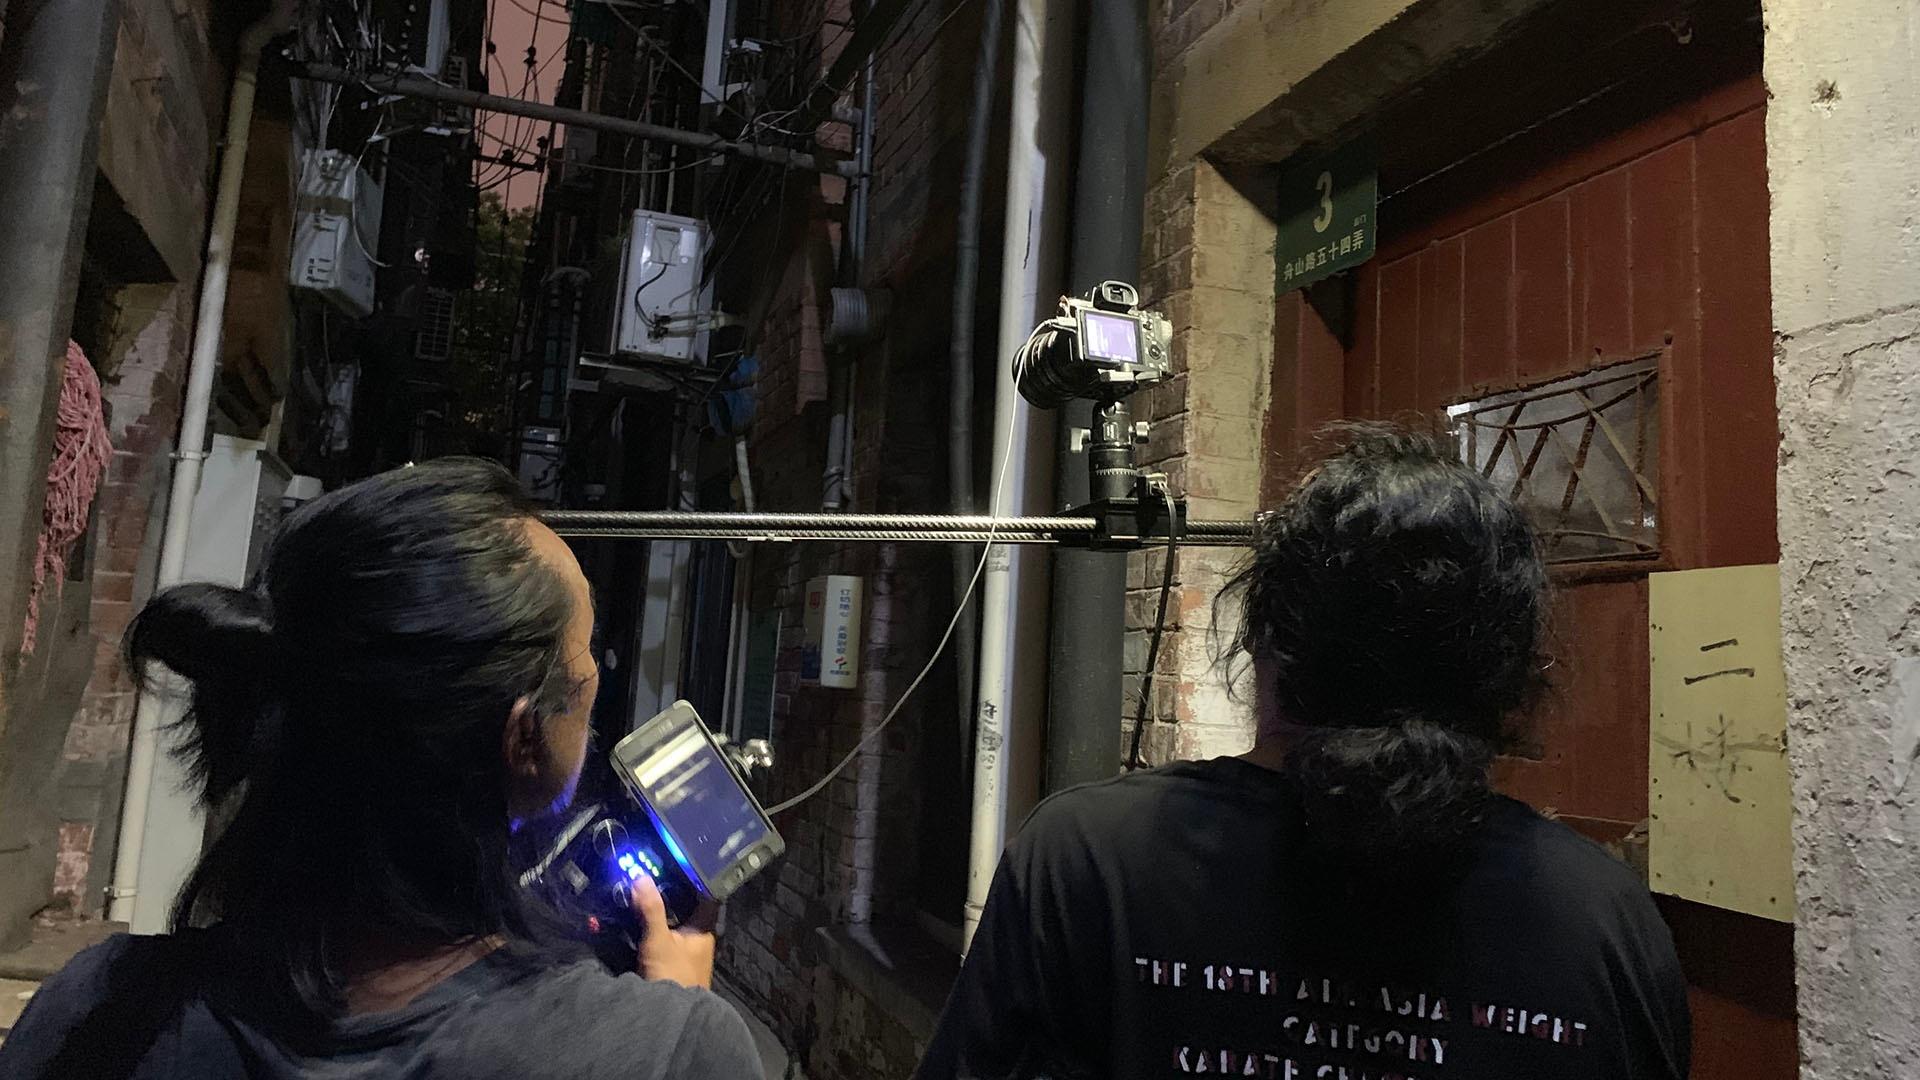 Jason Wong and assistant filming in the Shanghai ghetto.